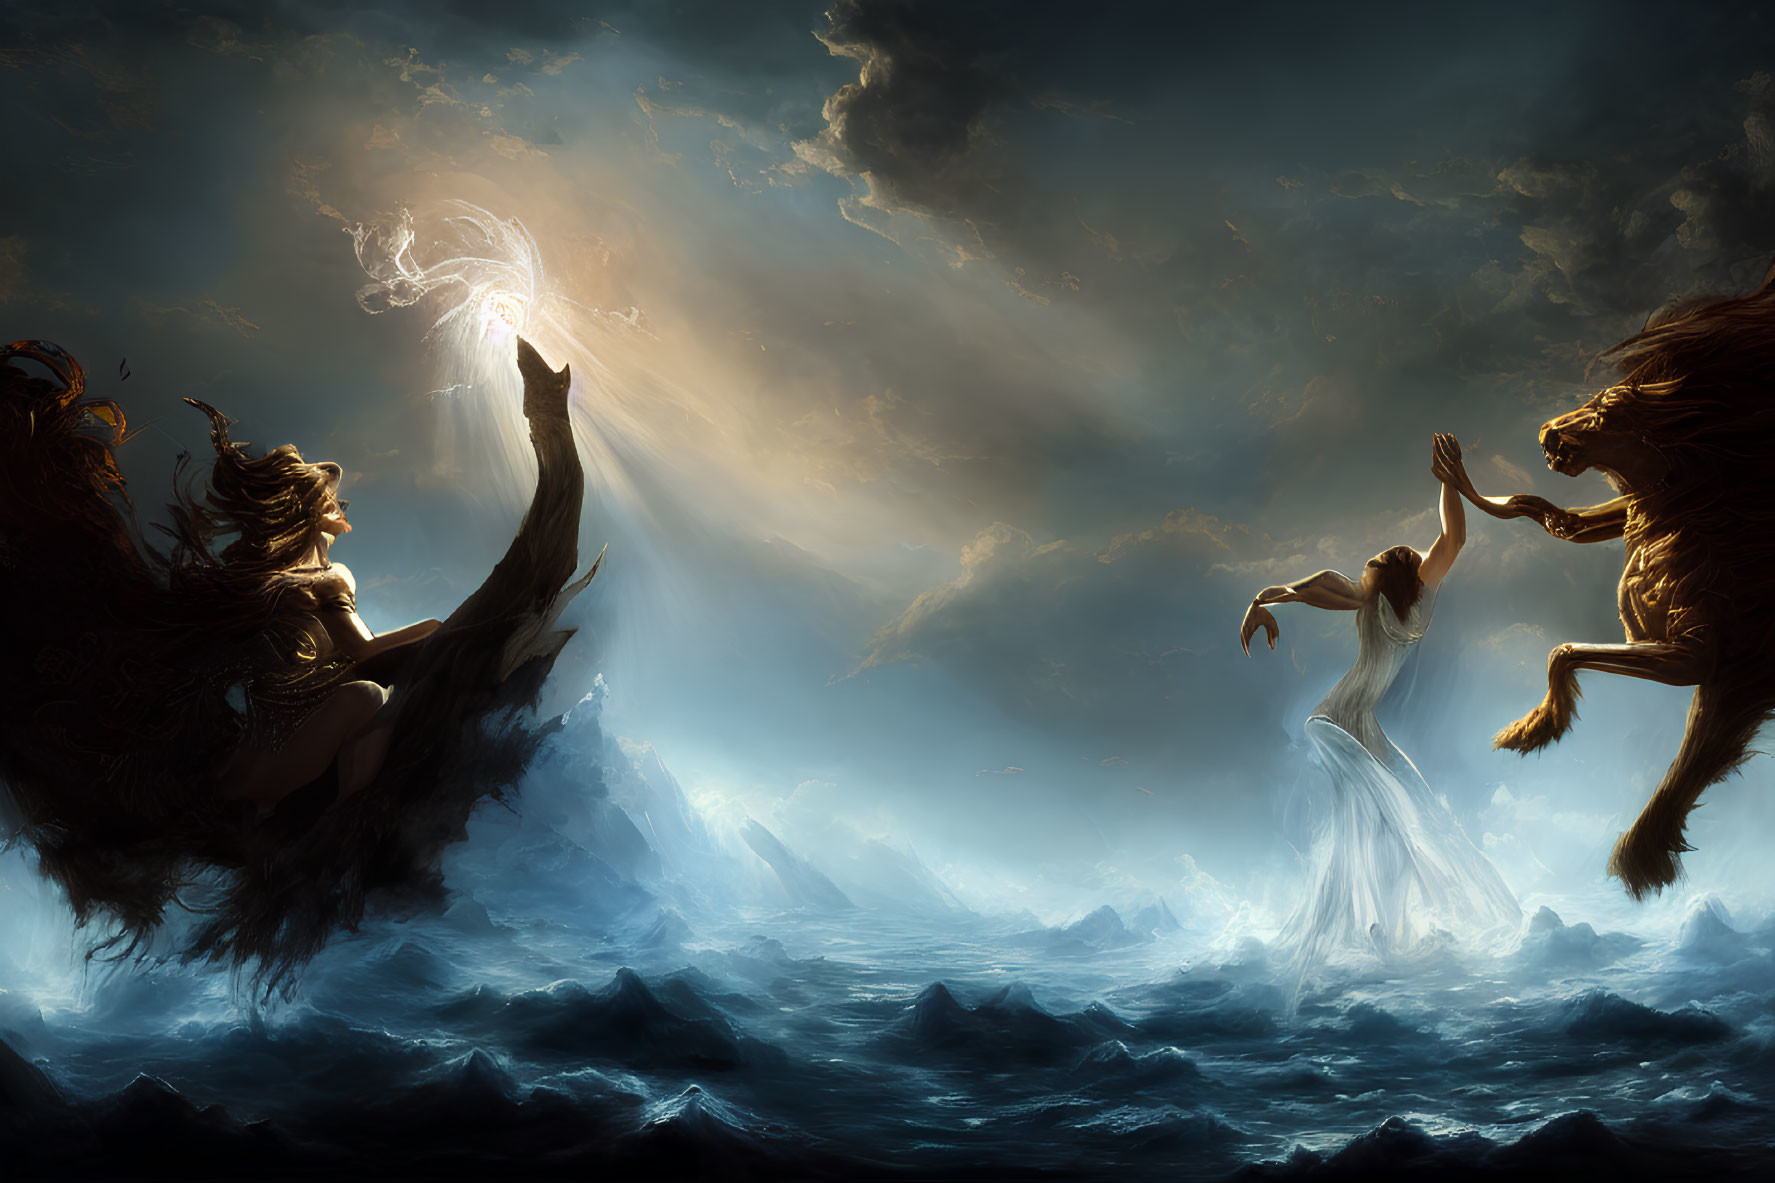 Mystical scene: two ethereal figures on stormy seas with dramatic rays